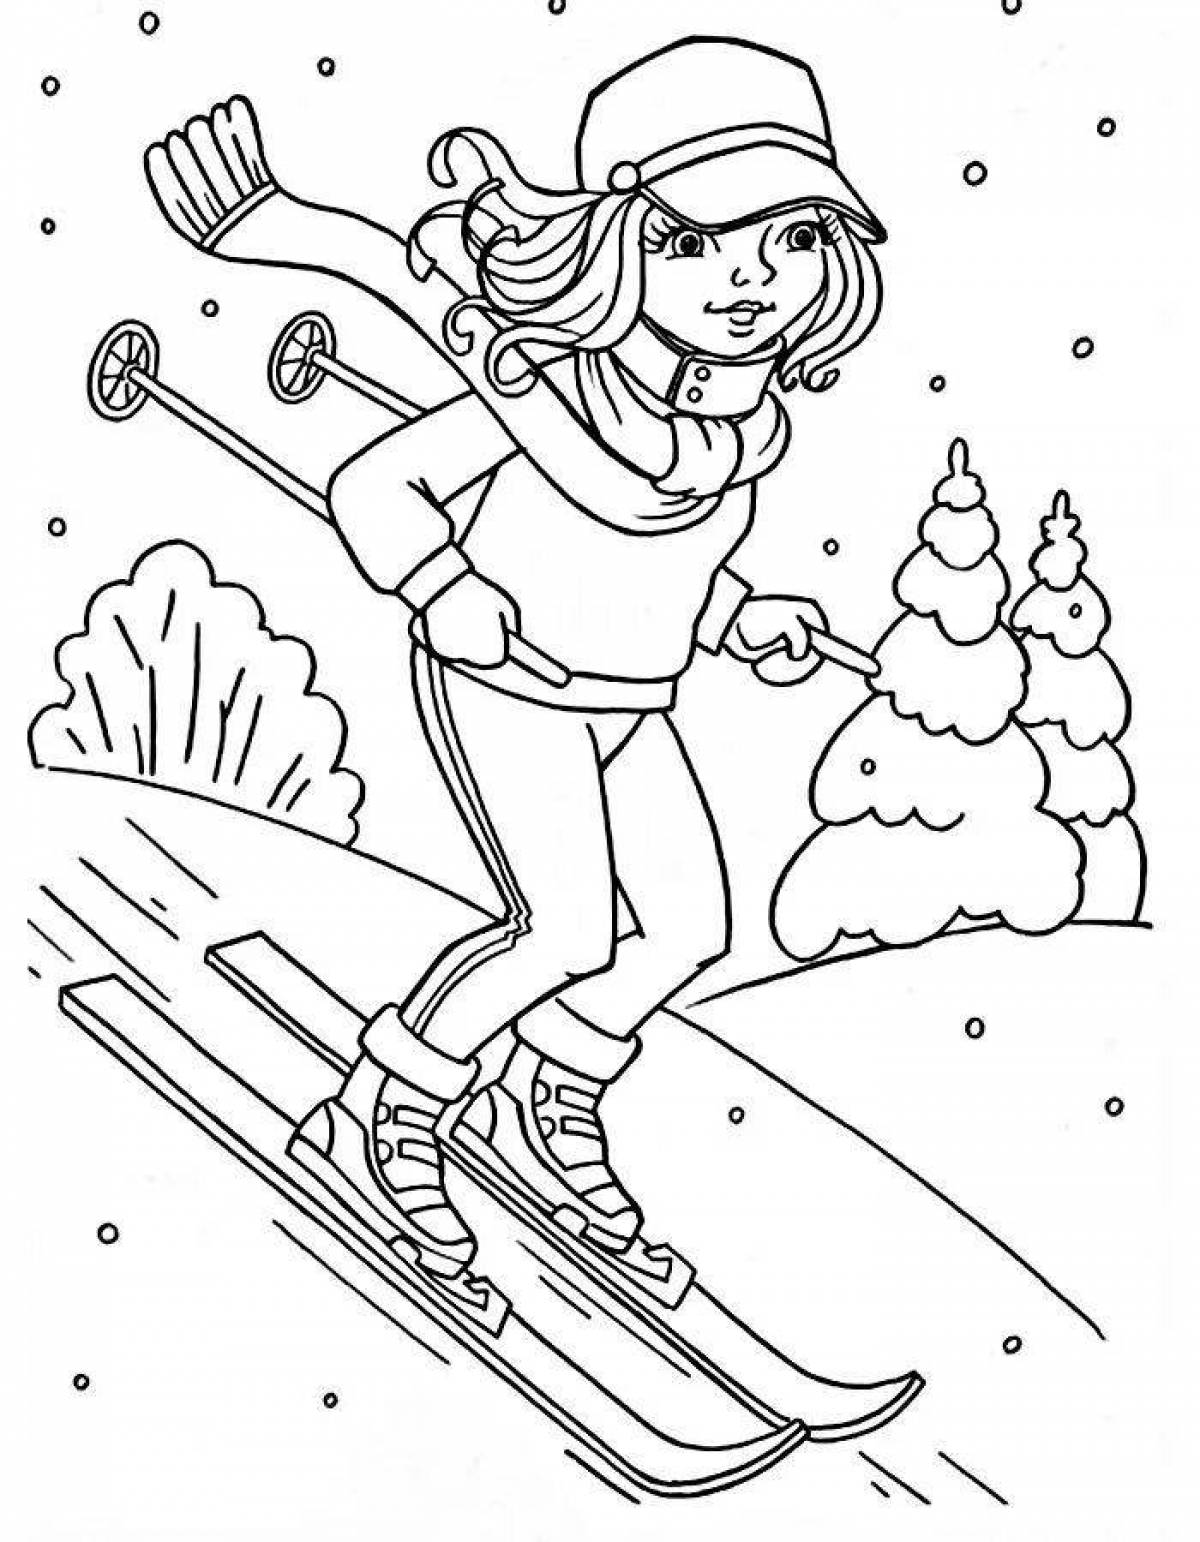 Sparkly coloring book for kids winter sports